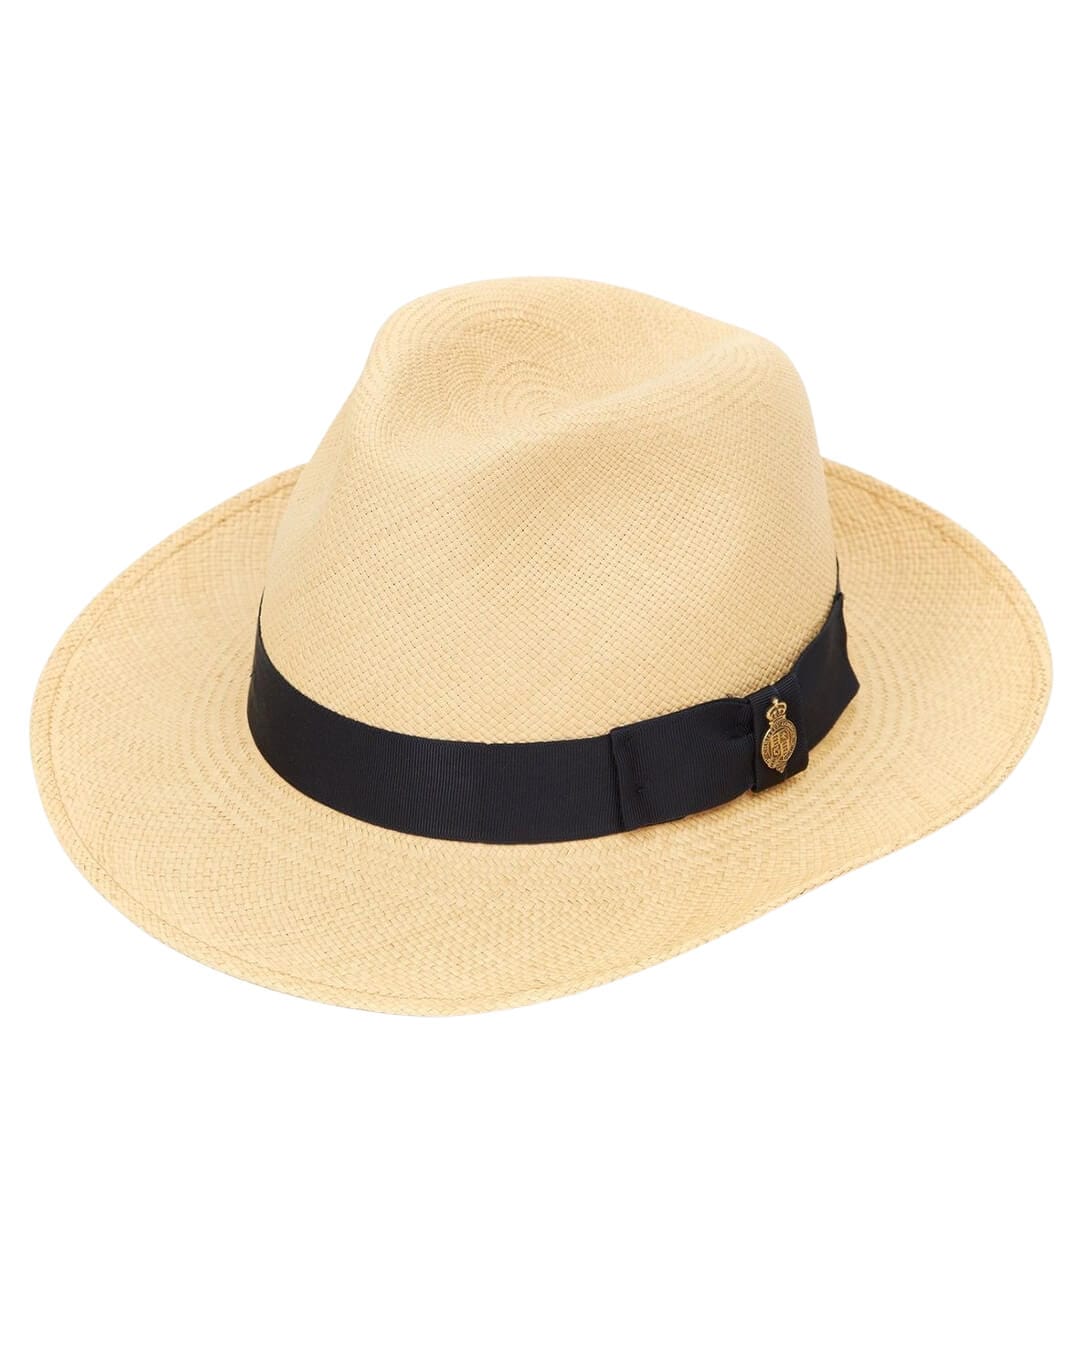 Chrysty Hats Christys Classic Panama Hat Notting Hill With Navy Band